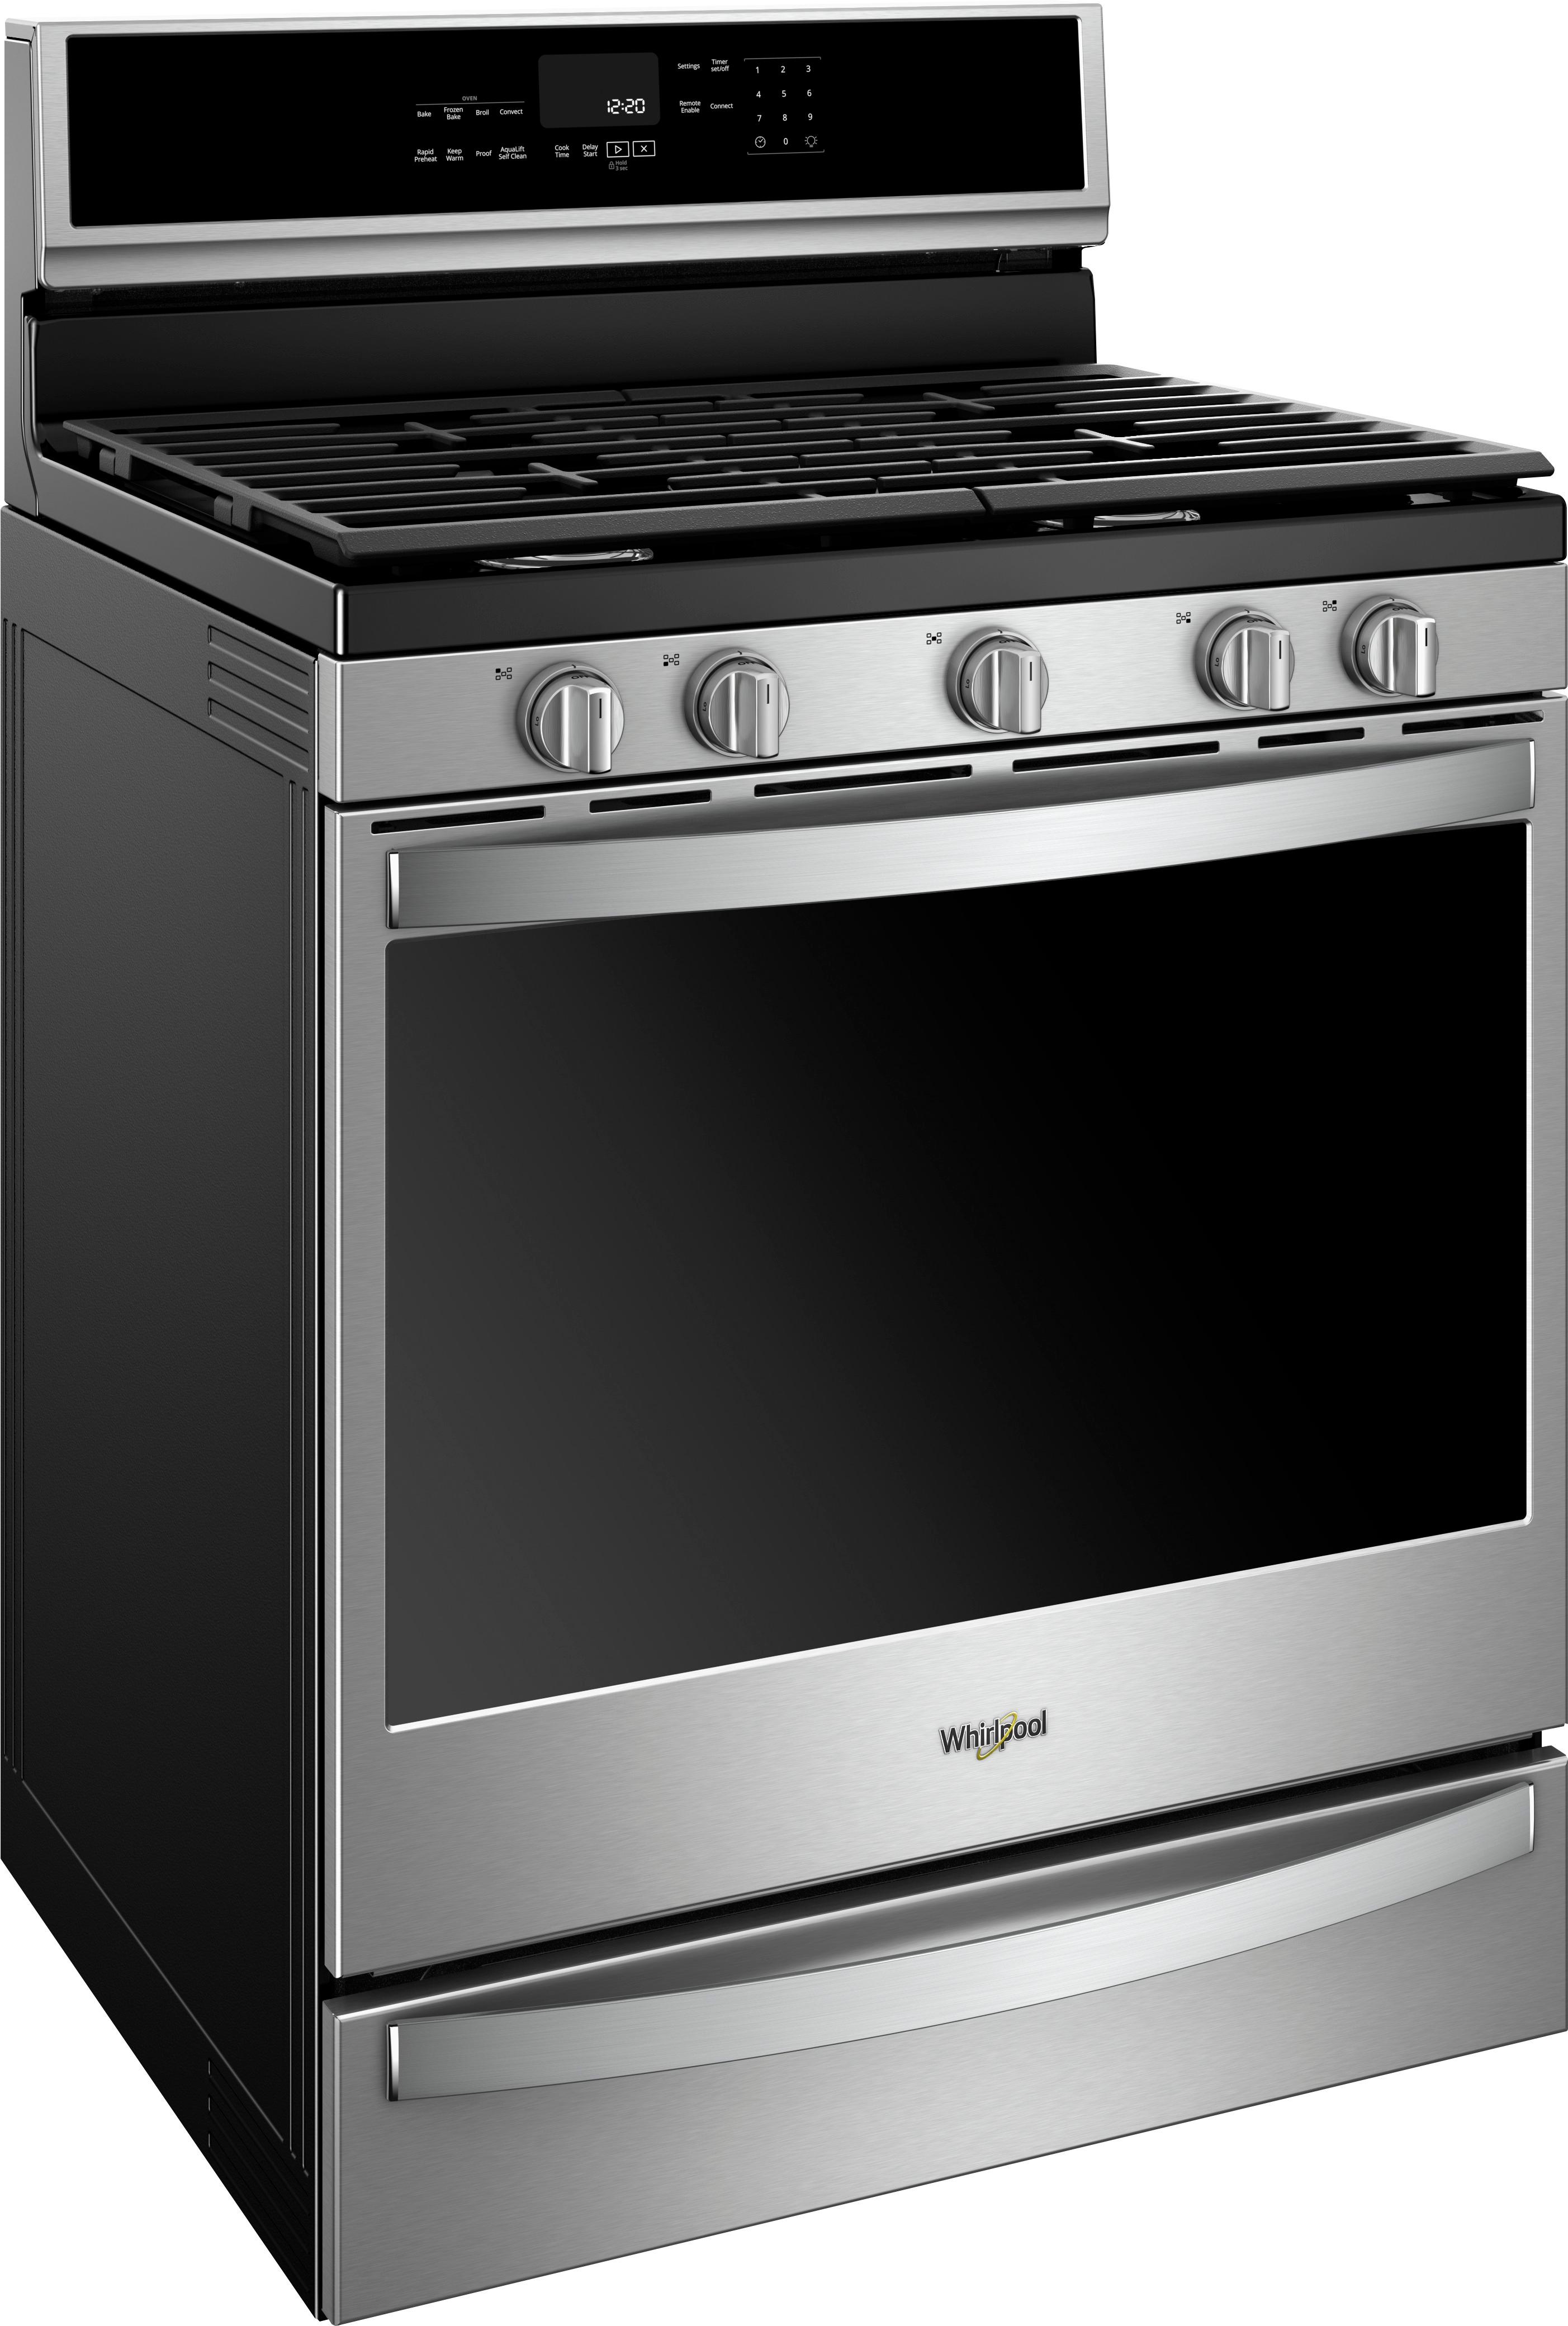 Angle View: Whirlpool - 5.8 Cu. Ft. Self-Cleaning Freestanding Gas Convection Range - Stainless steel